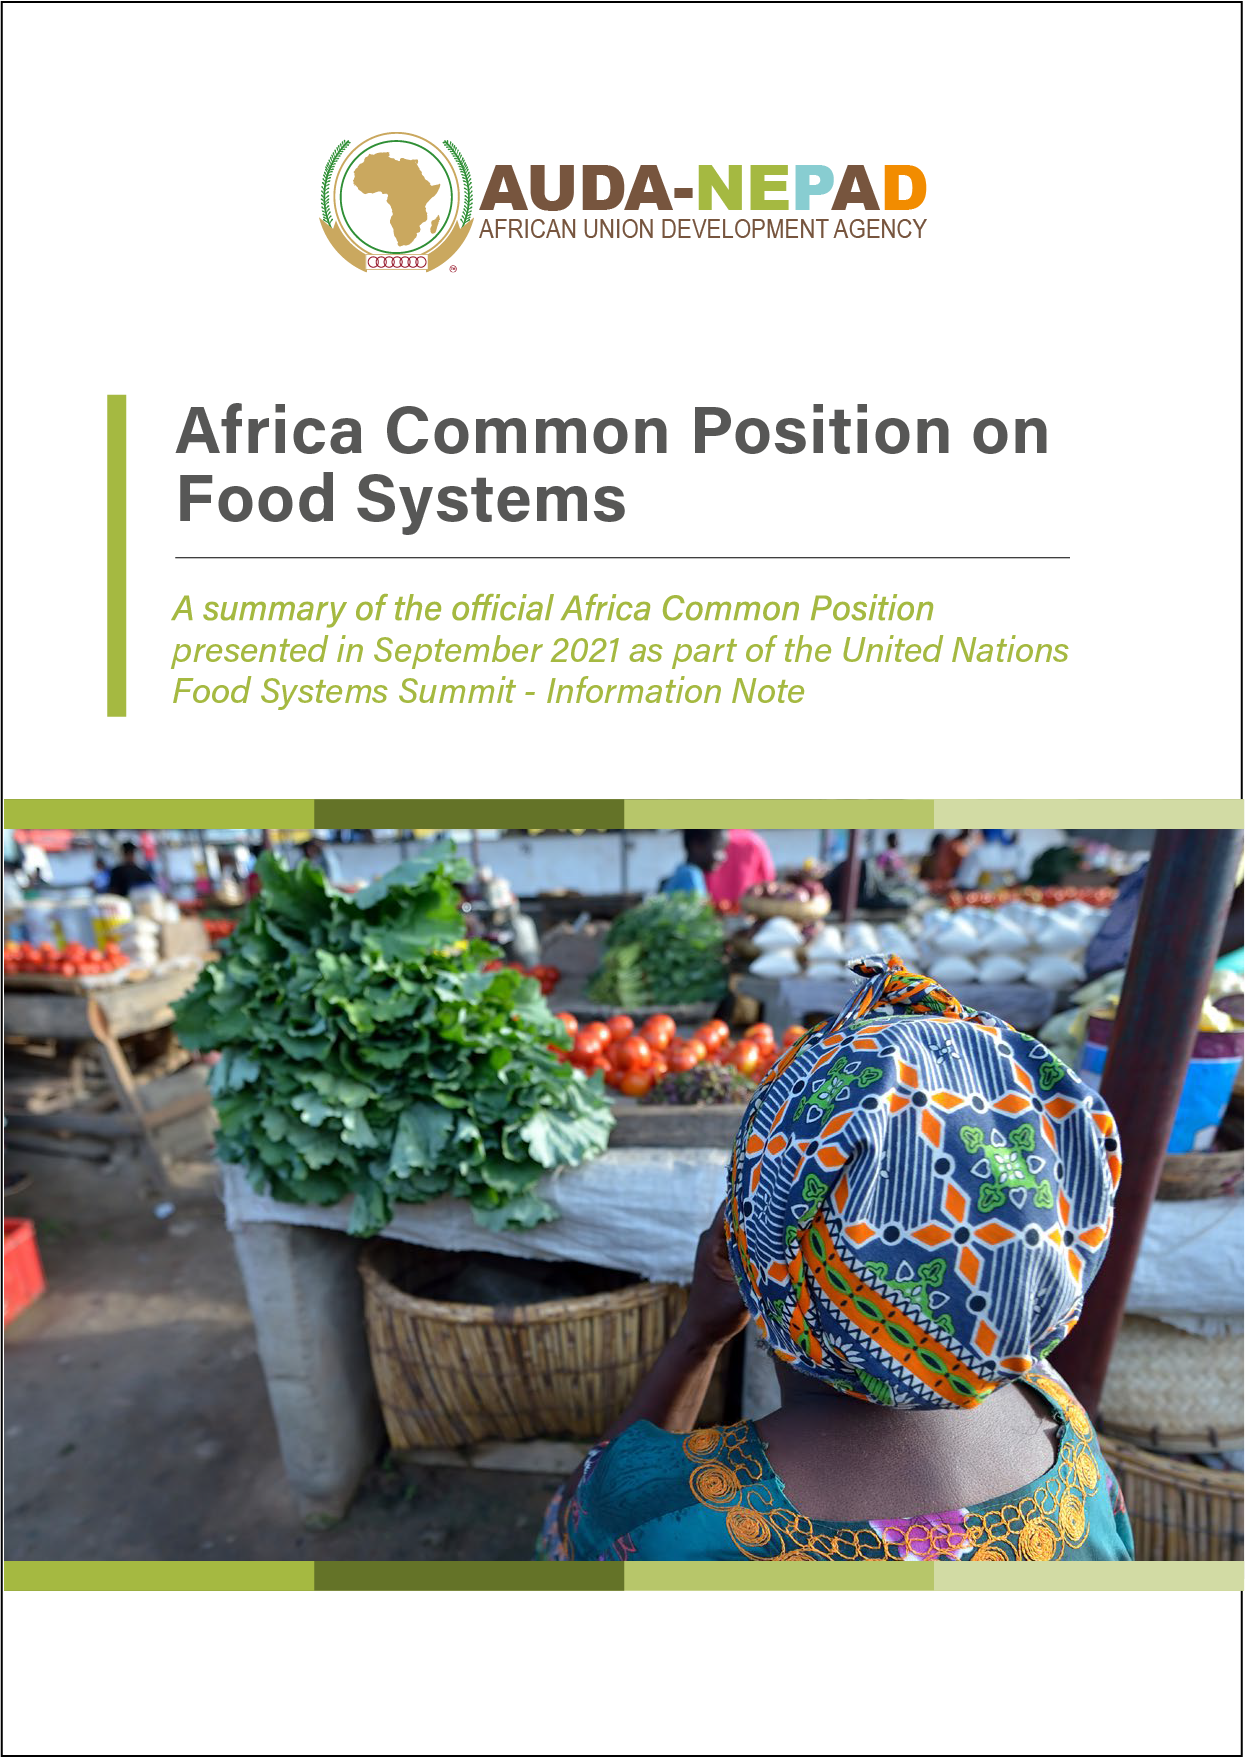 Africa Common Position on Food Systems